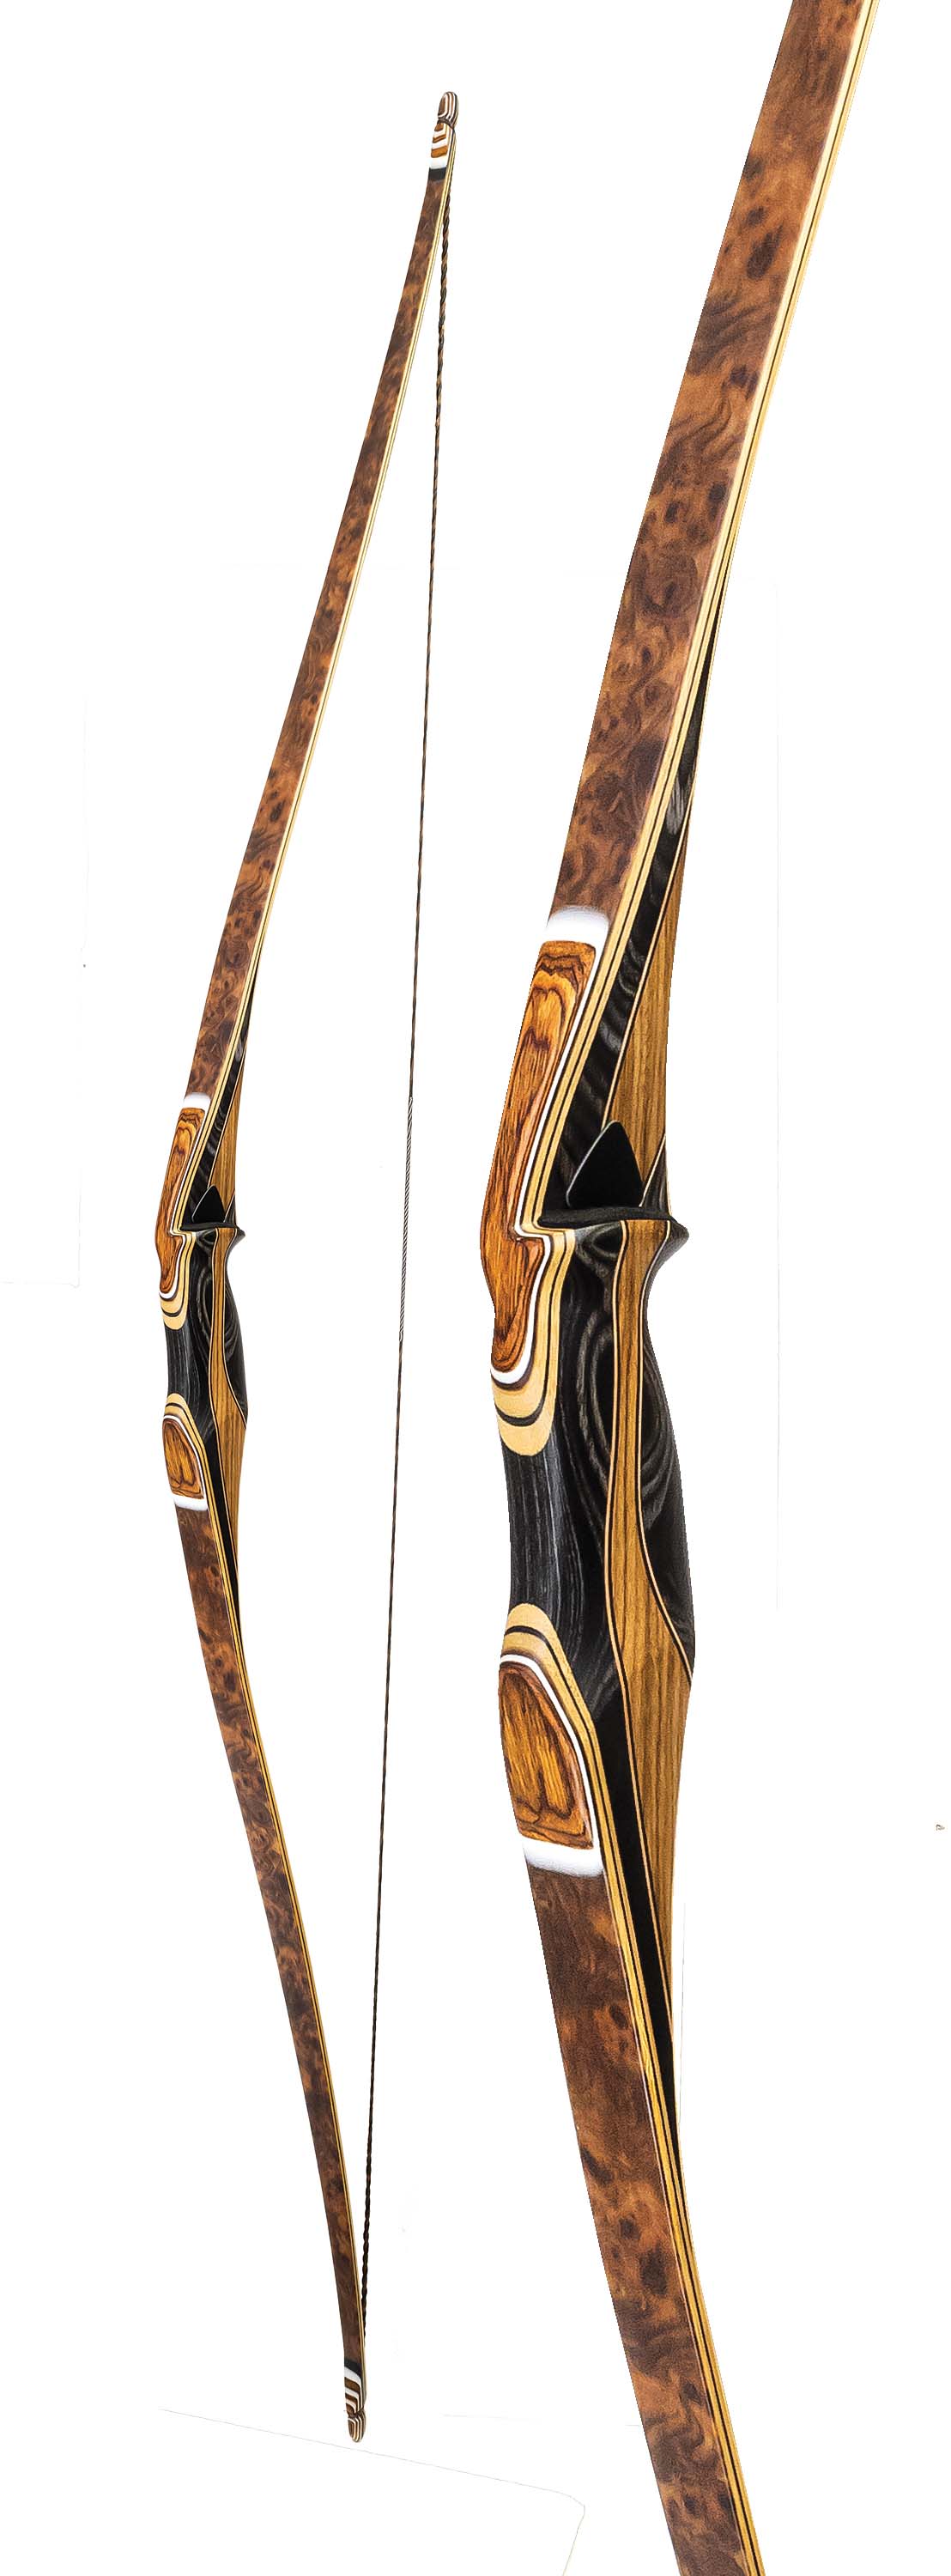 Traditional Only 62 Oberon Longbow